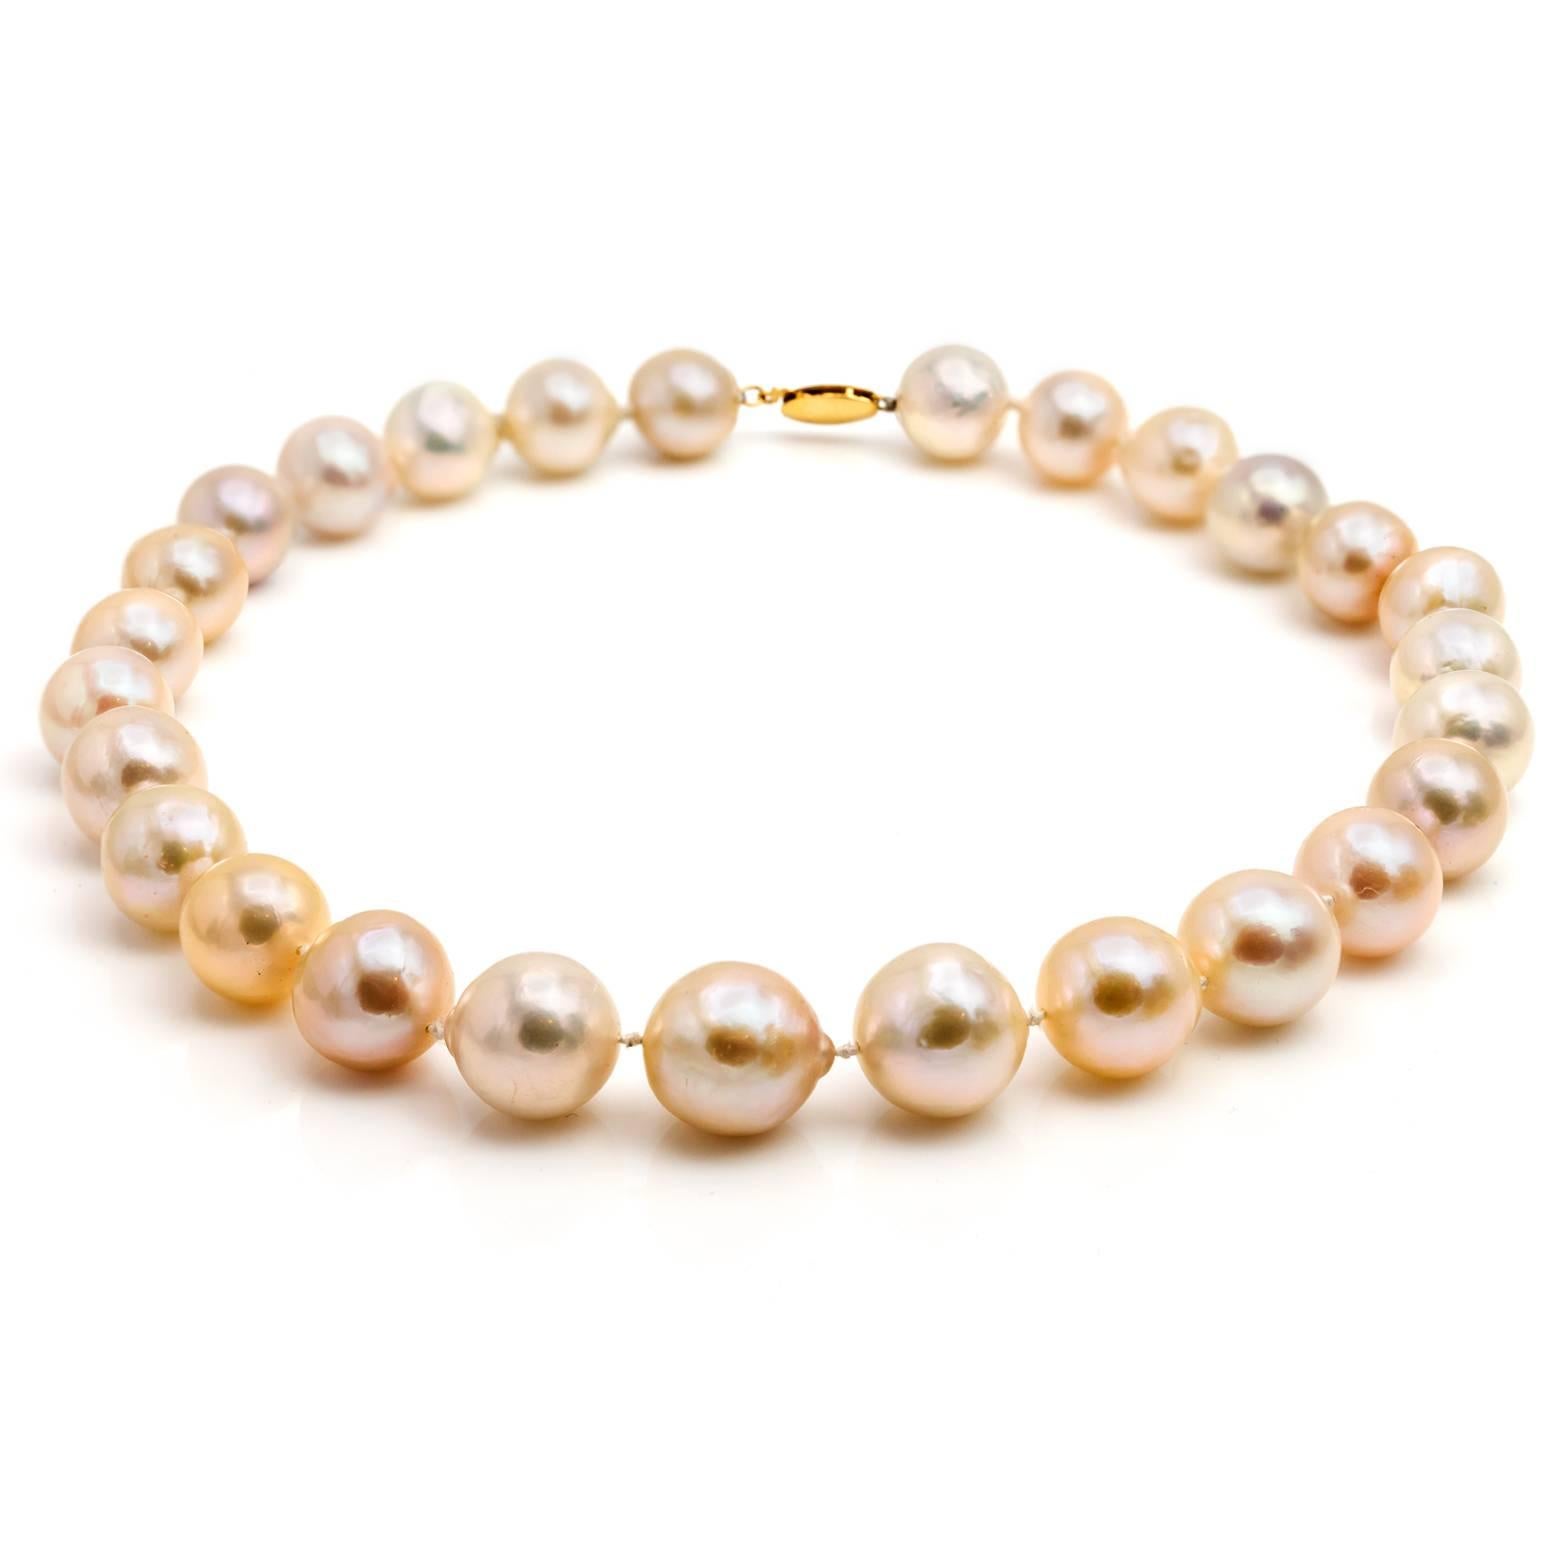 27 gorgeous fresh water pearls slightly taper from larger ones in the middle to smaller in the back. These white pearls have a light peachy-pink and silvery color to them with a 14K yellow gold clasp.  Absolutely stunning and add glamour to